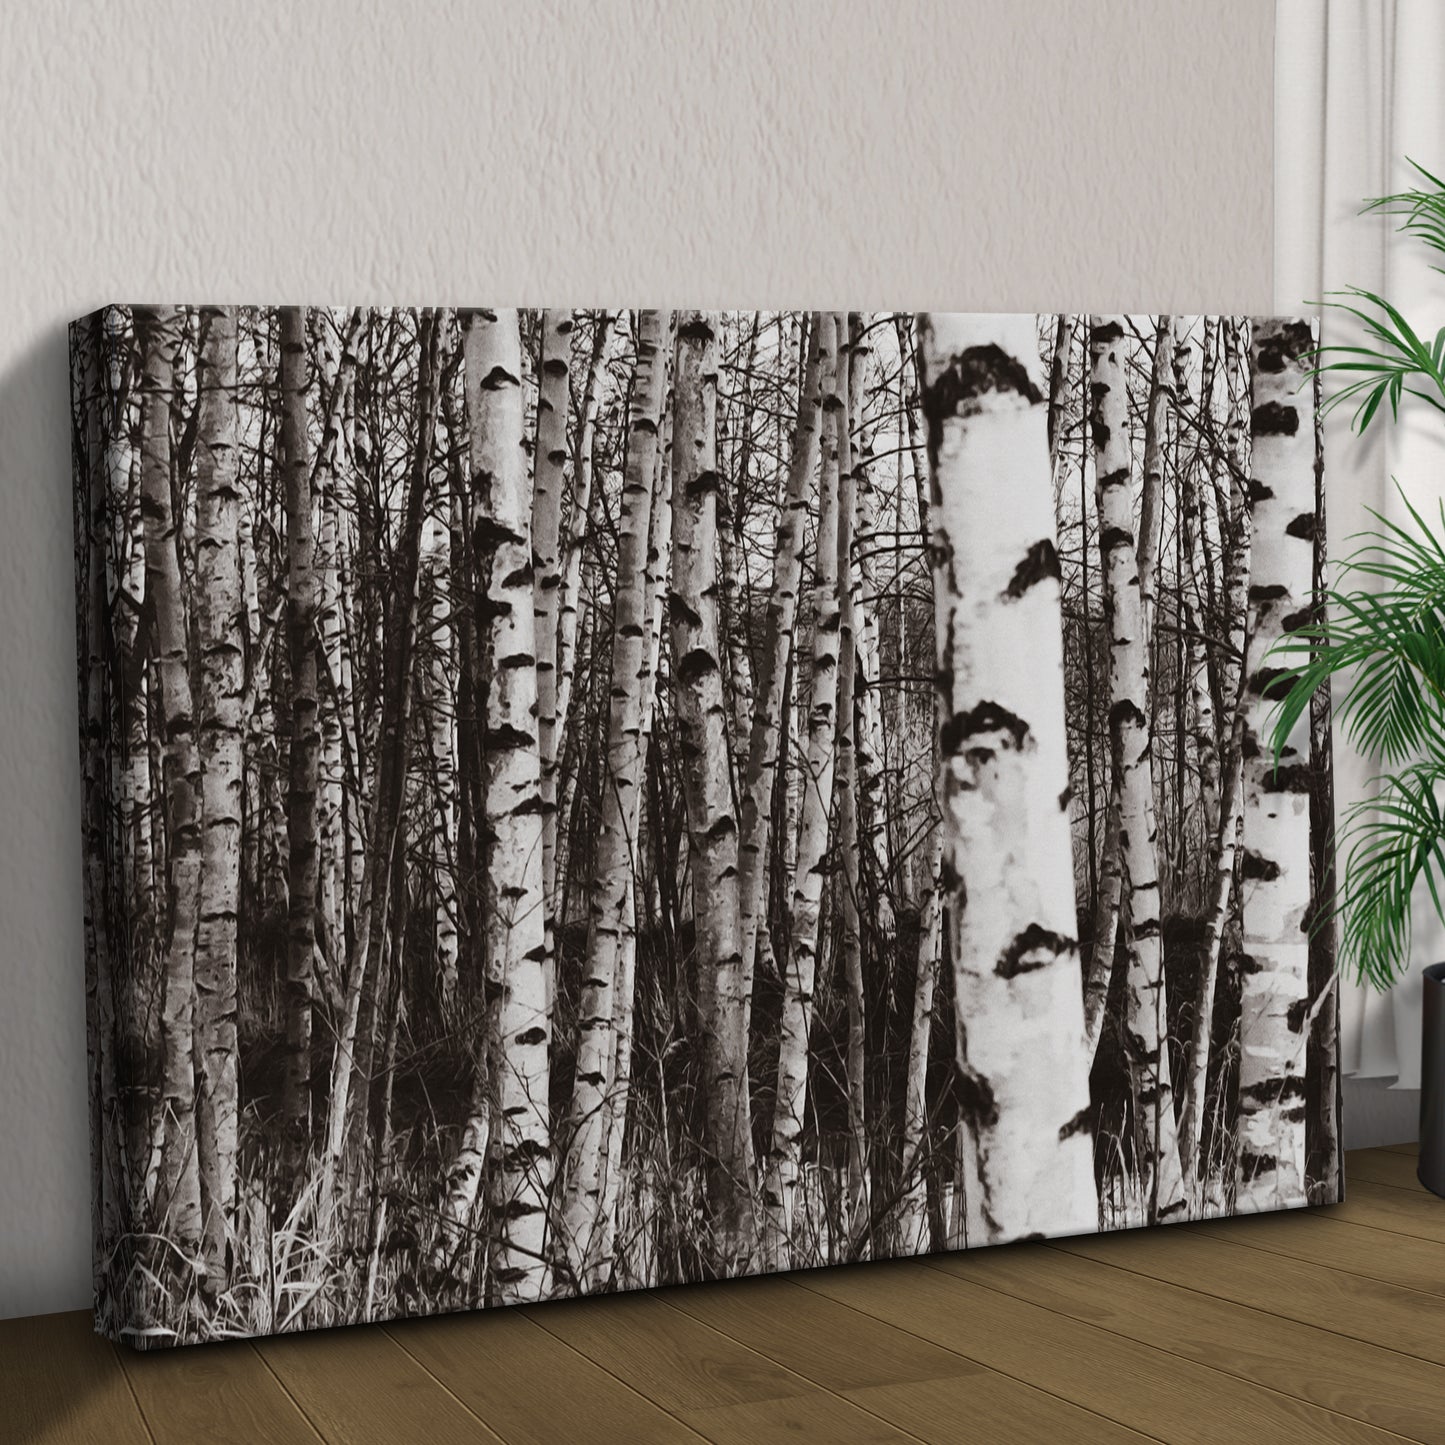 Grayscale Birch Tree Trunks Canvas Wall Art Style 1 - Image by Tailored Canvases